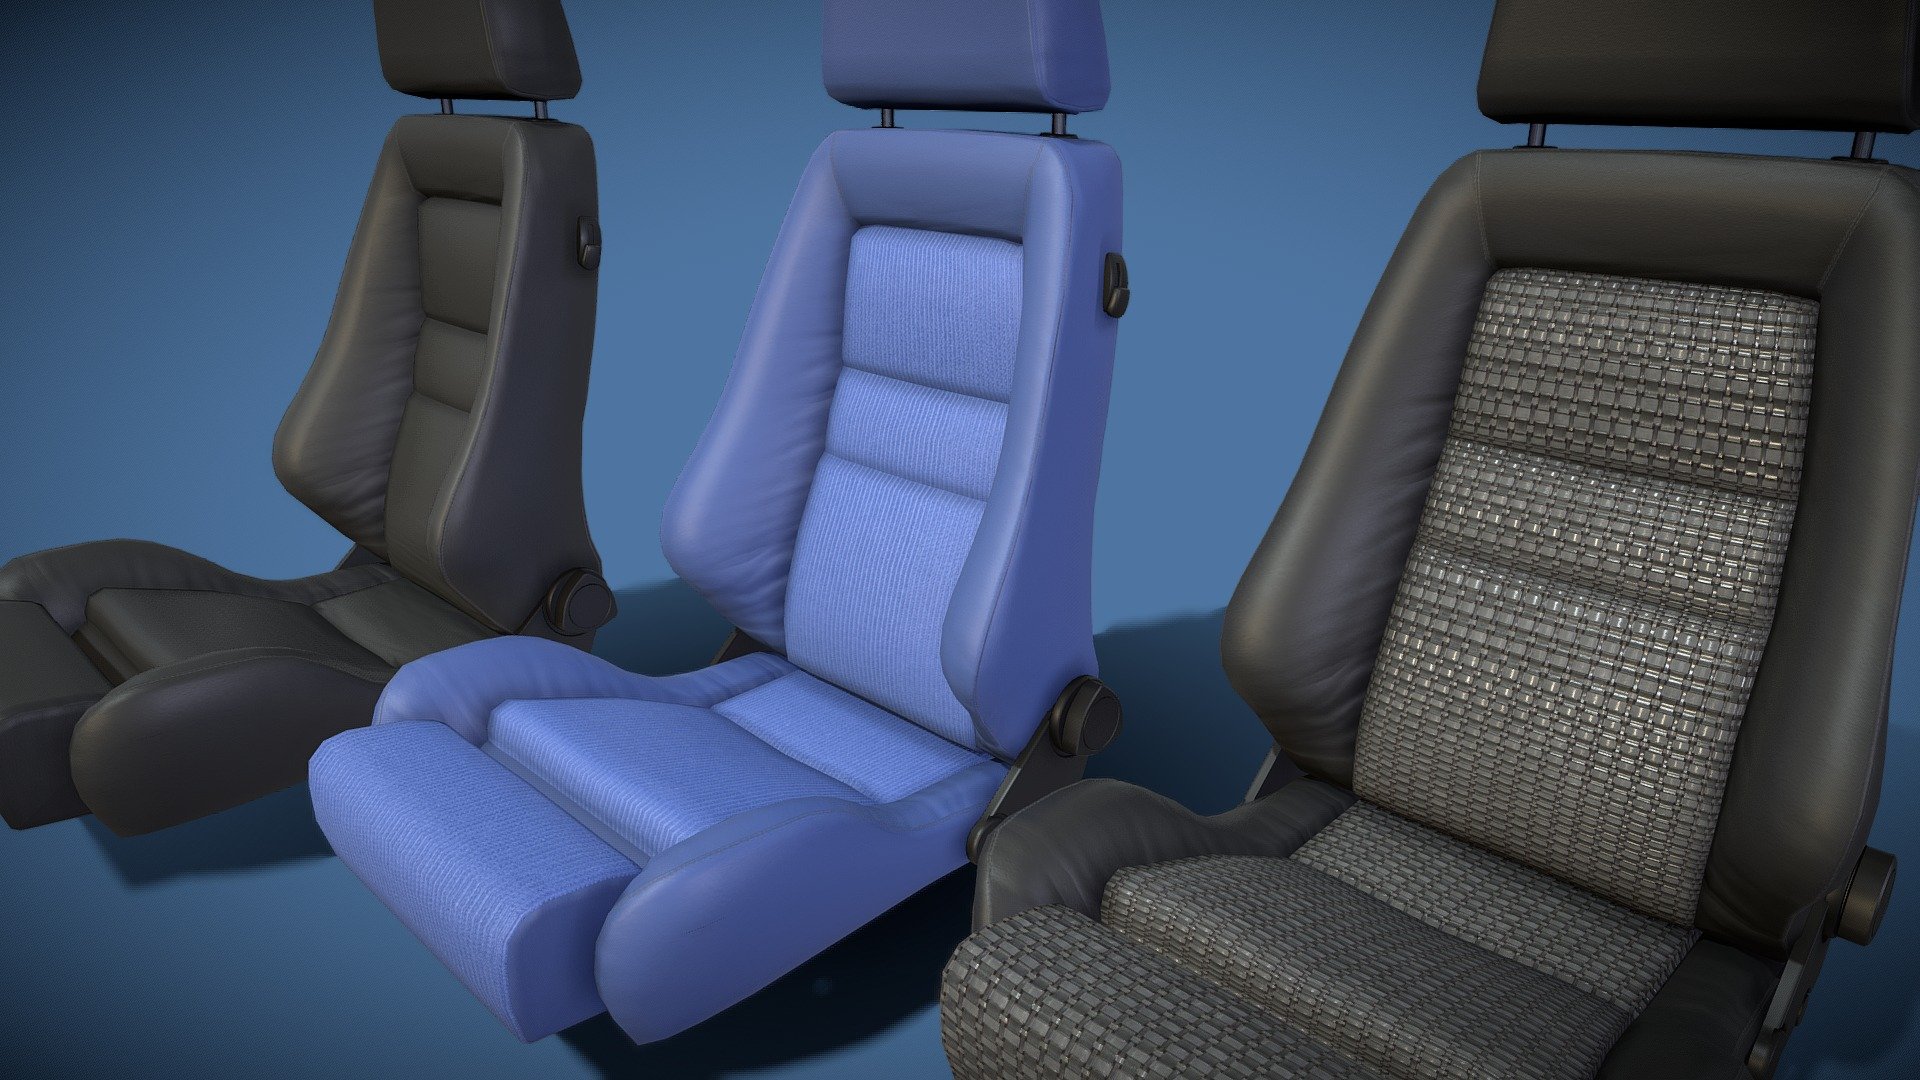 The Recaro Classic sport seats I made for the 911SC model. You can of course use it universally where you want. In leather, linen and nubuck variants.
Midpoly, PBR, short animation to show the simple backrest rig 3d model